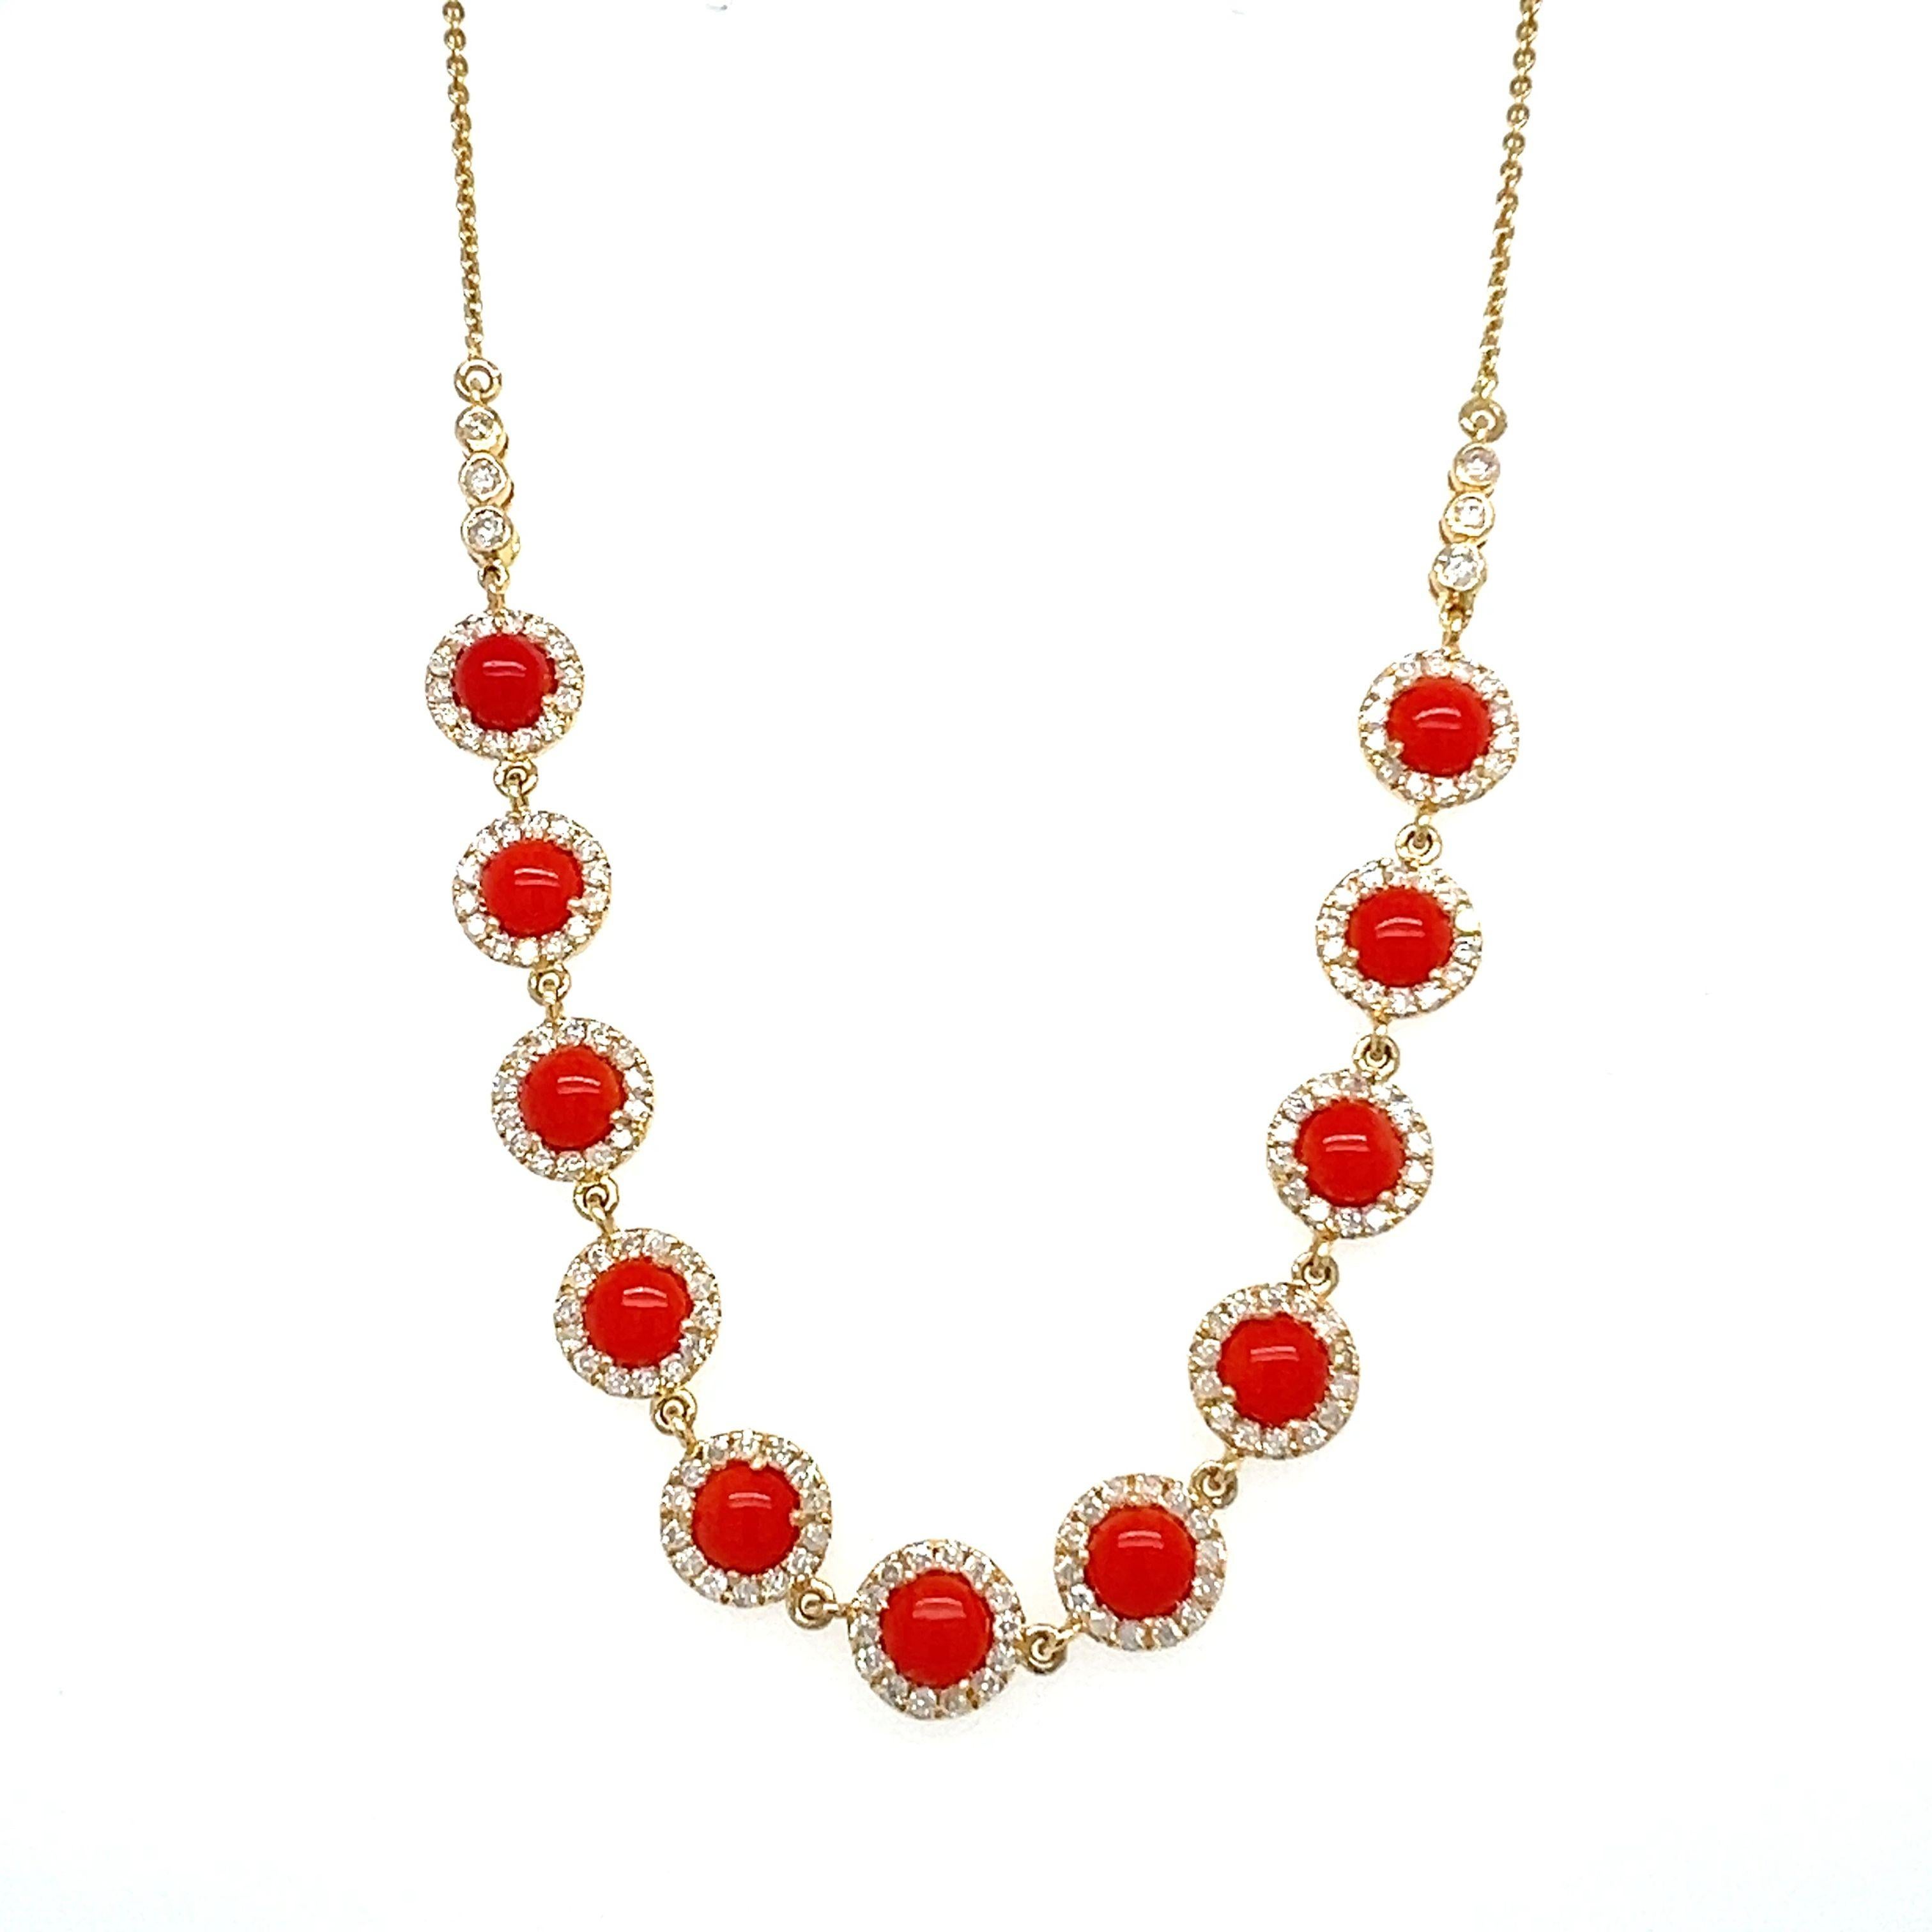 An 18-karat yellow gold necklace set with a natural 2.84-carat Coral and 1.04-carat diamonds. This lovely, sophisticated necklace with an adjustable catch. The necklace is 18 inches long, but you may modify the size to make it 16, 17, or 18 inches